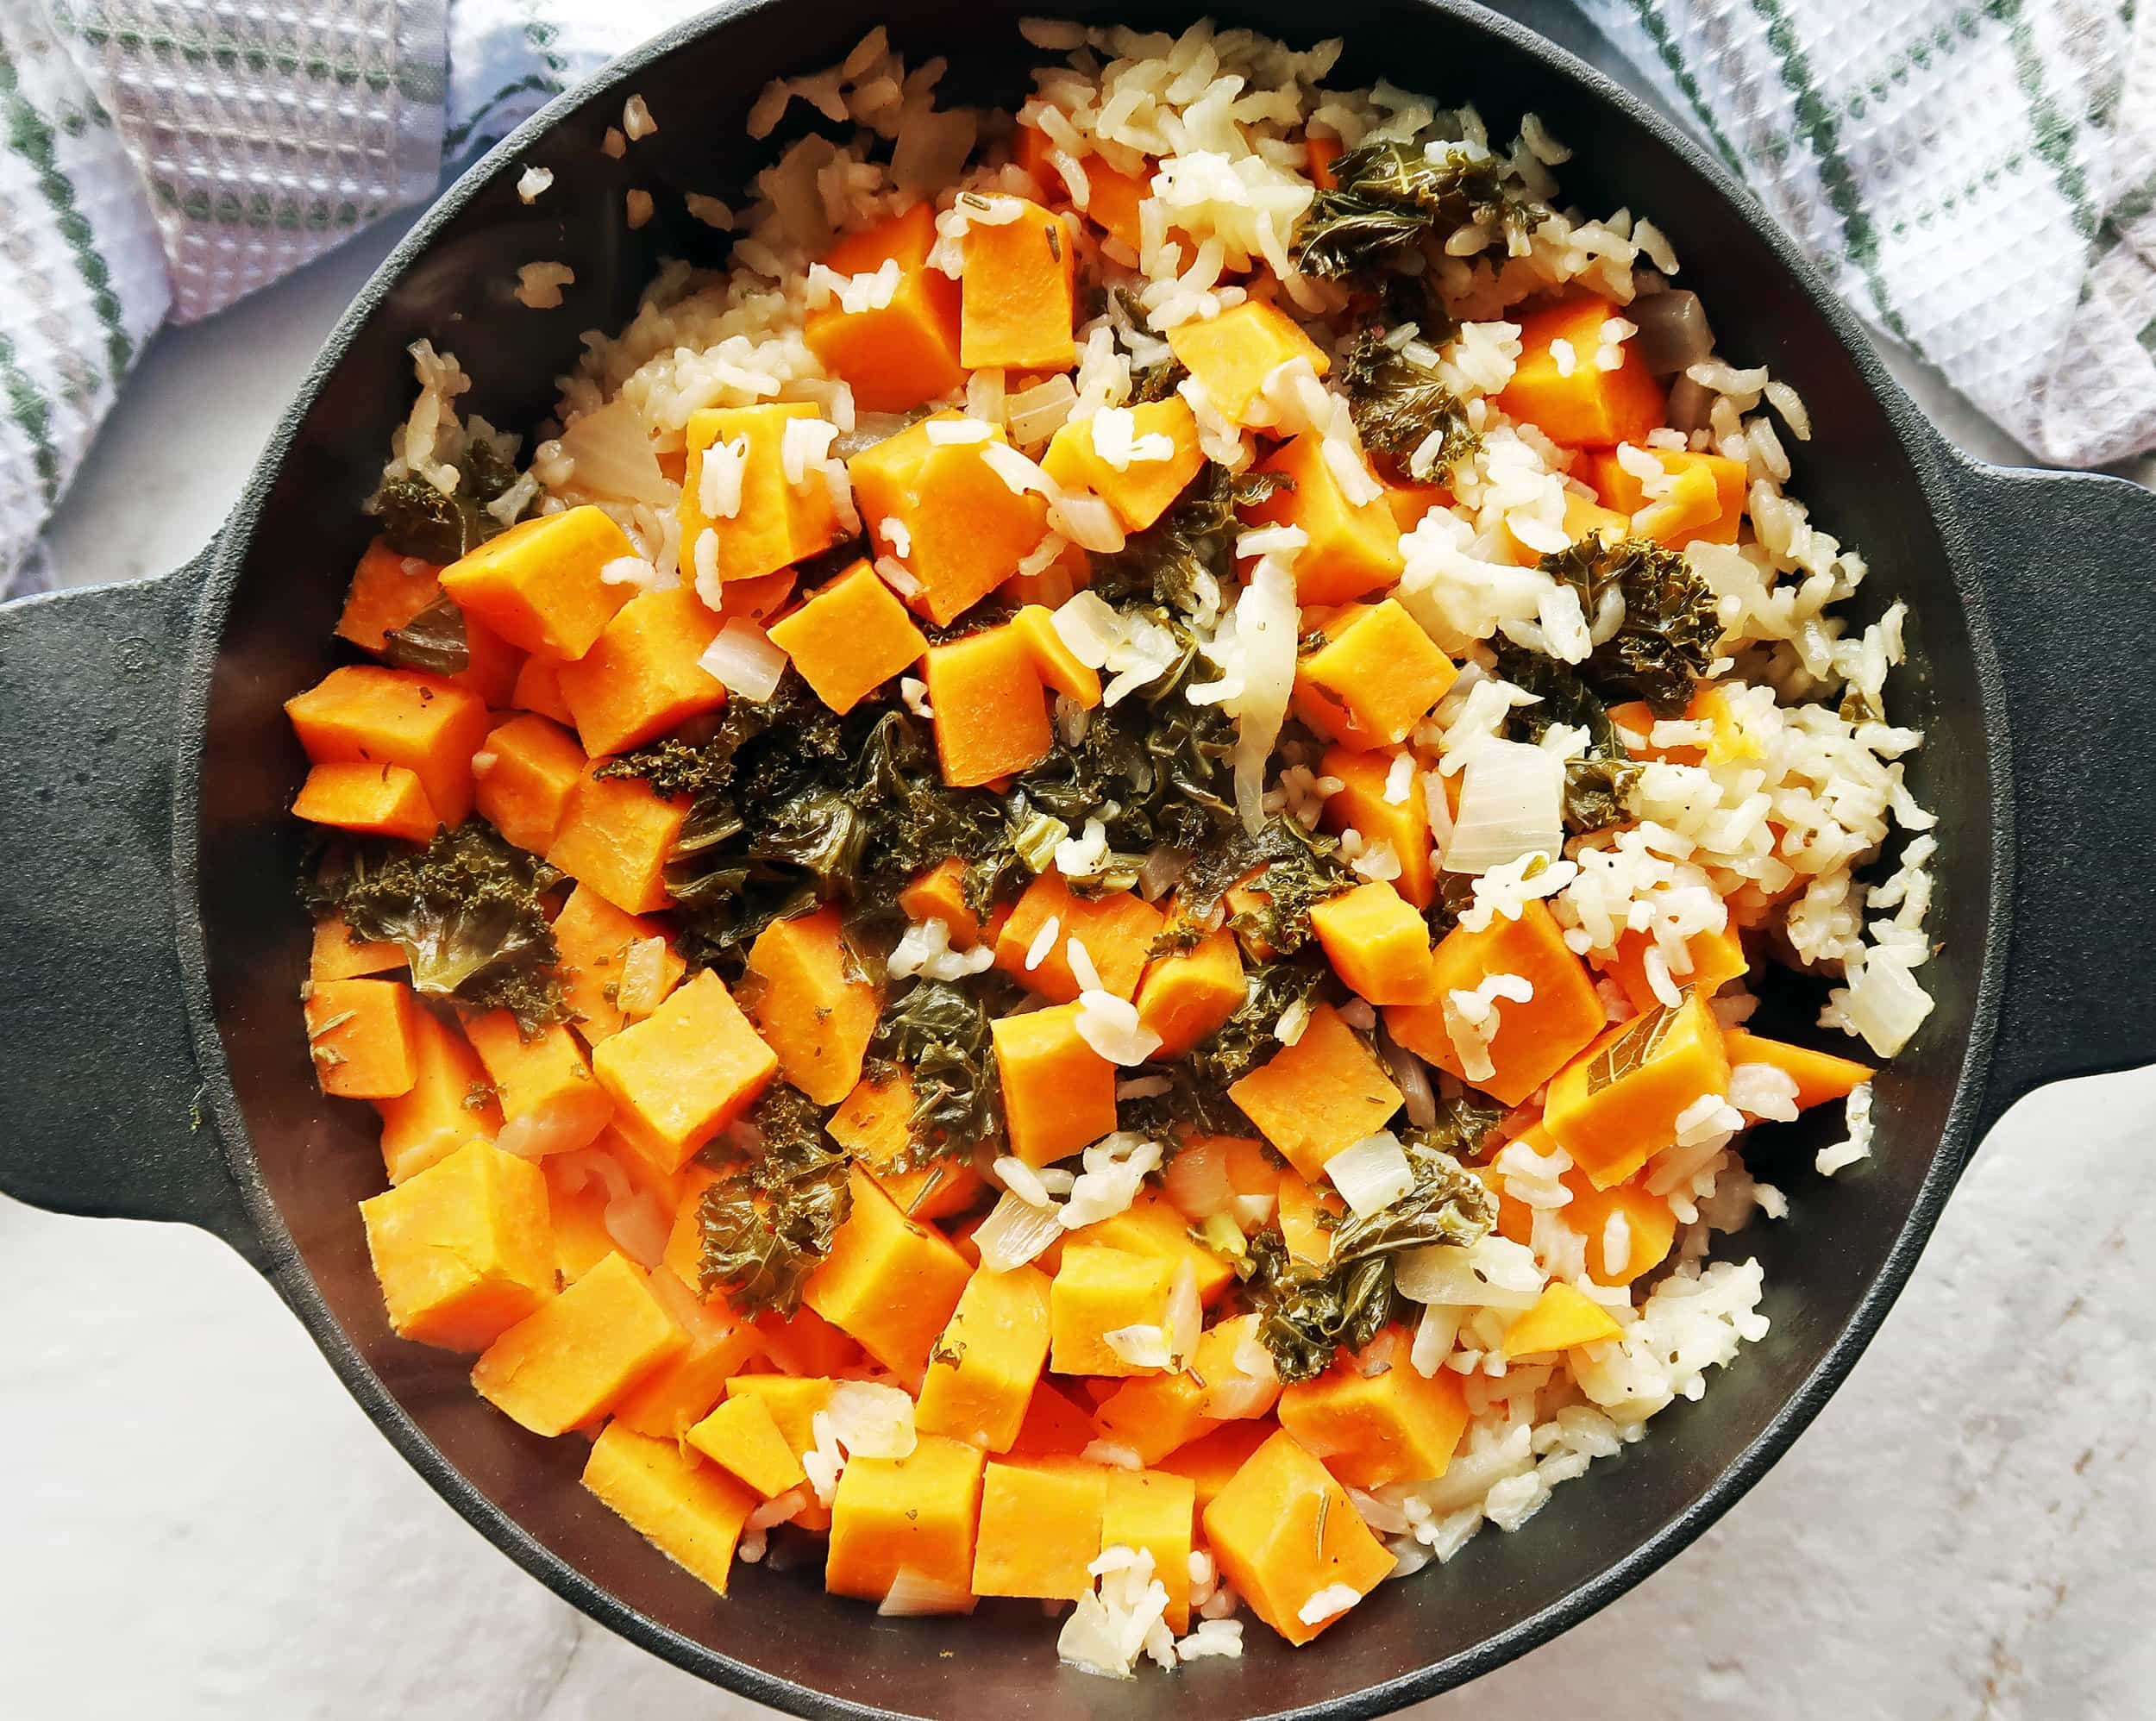 A Dutch oven full of vegetarian, gluten-free sweet potato and kale baked risotto.